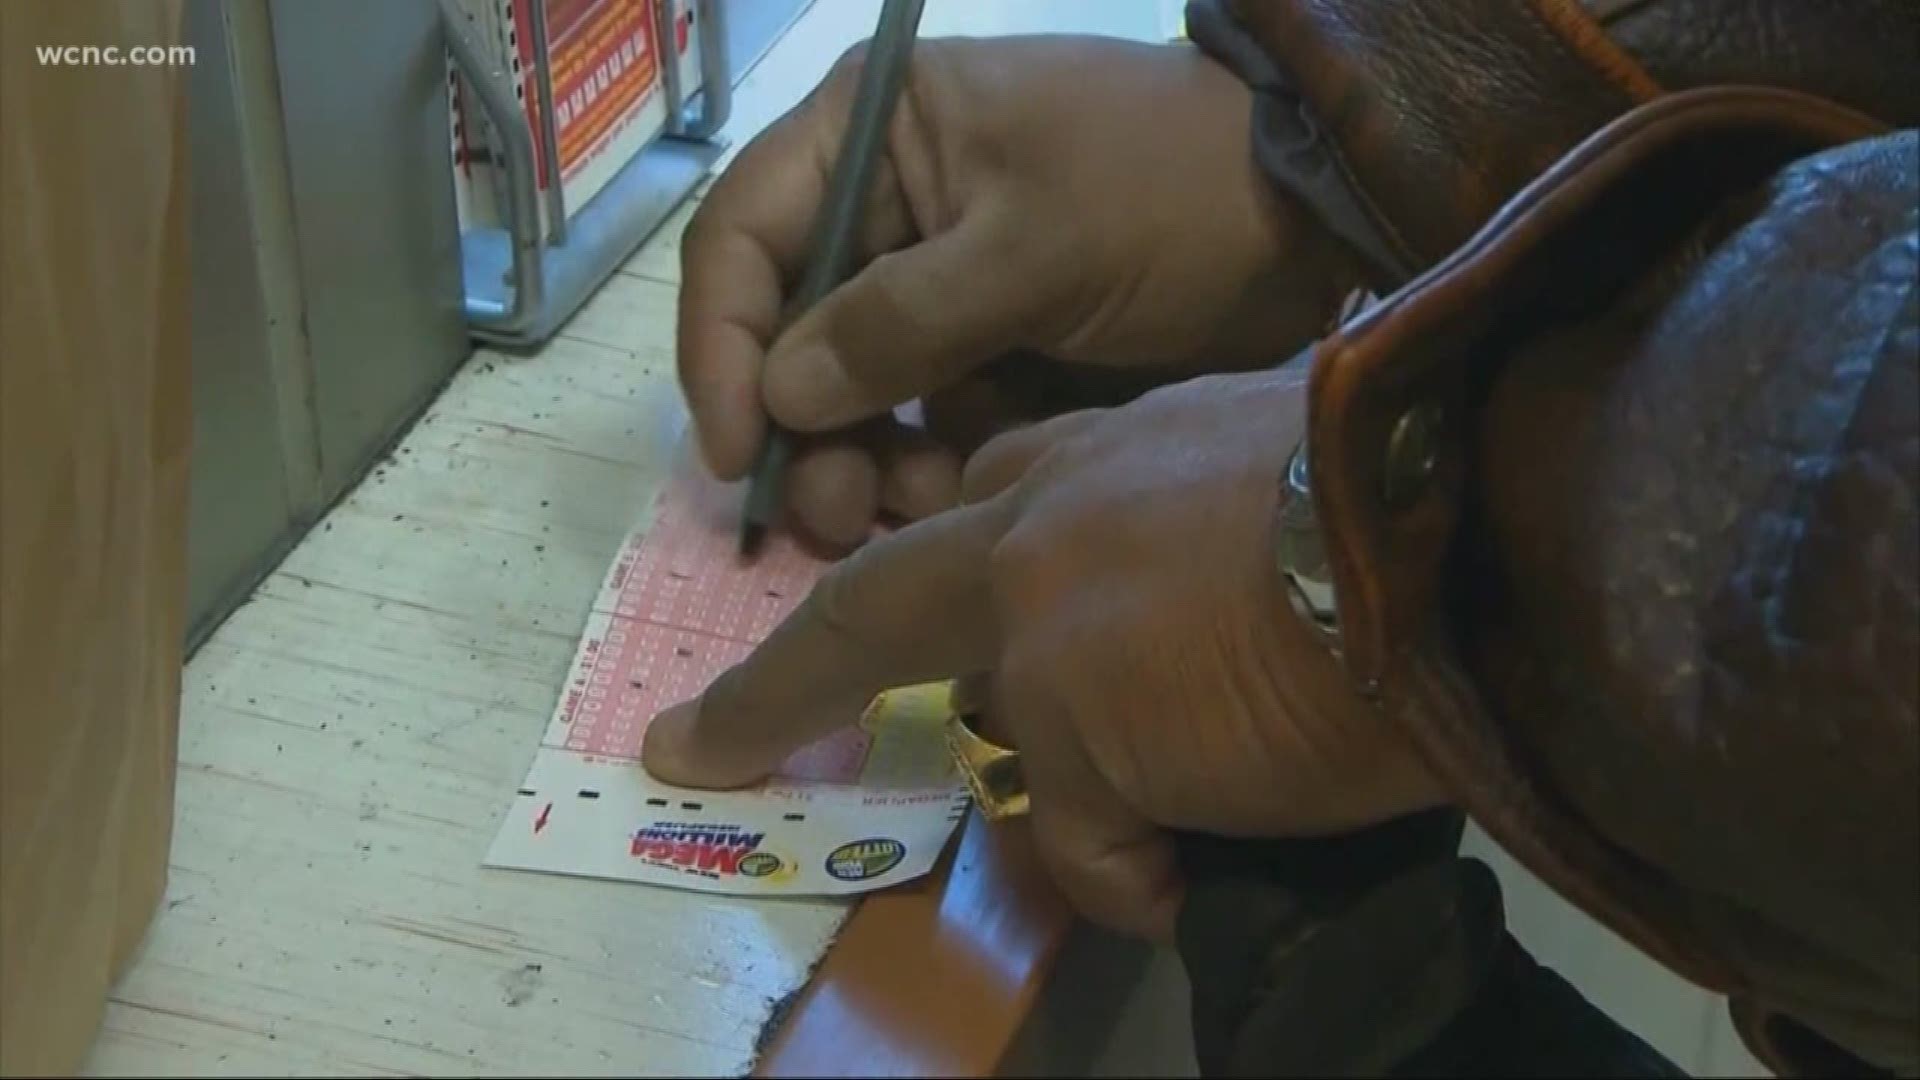 The lottery commission says a simple act of kindness from the winner led to the jackpot. The winner allowed someone to go ahead of them in line to purchase a ticket.